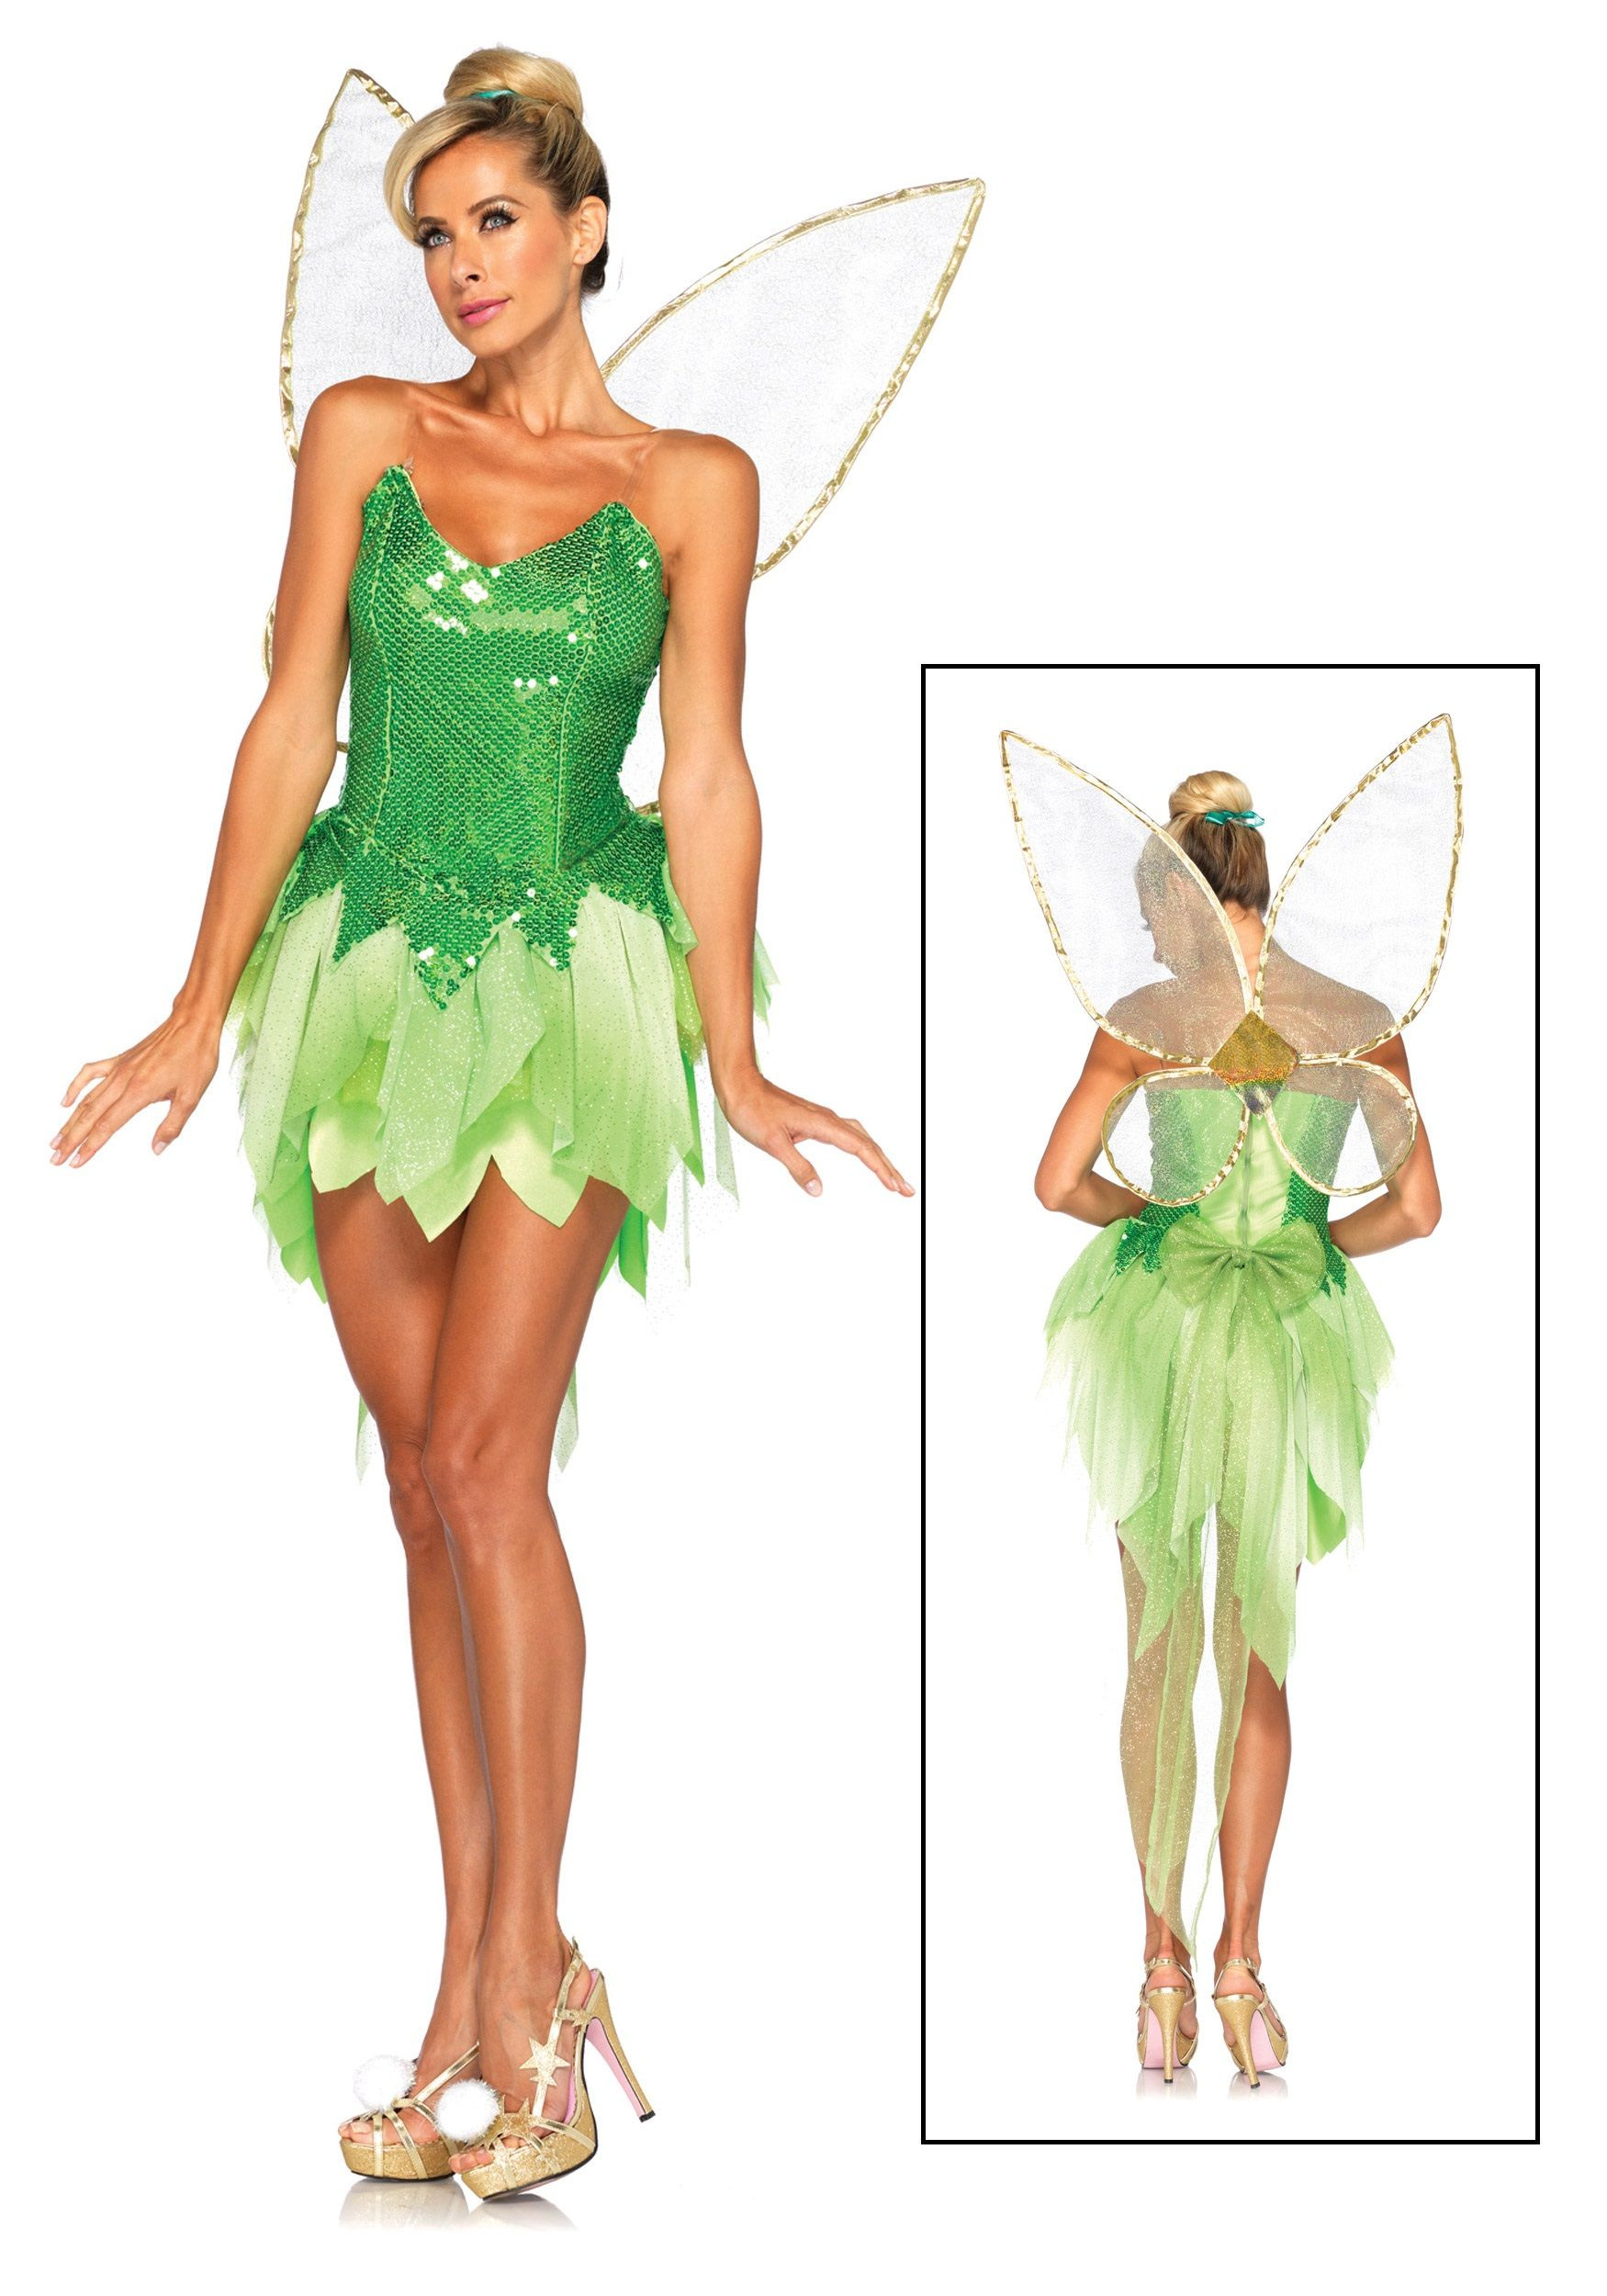 Tinkerbell Costume Adult DIY
 Womens Disney Pixie Dust Tink Costume in 2019